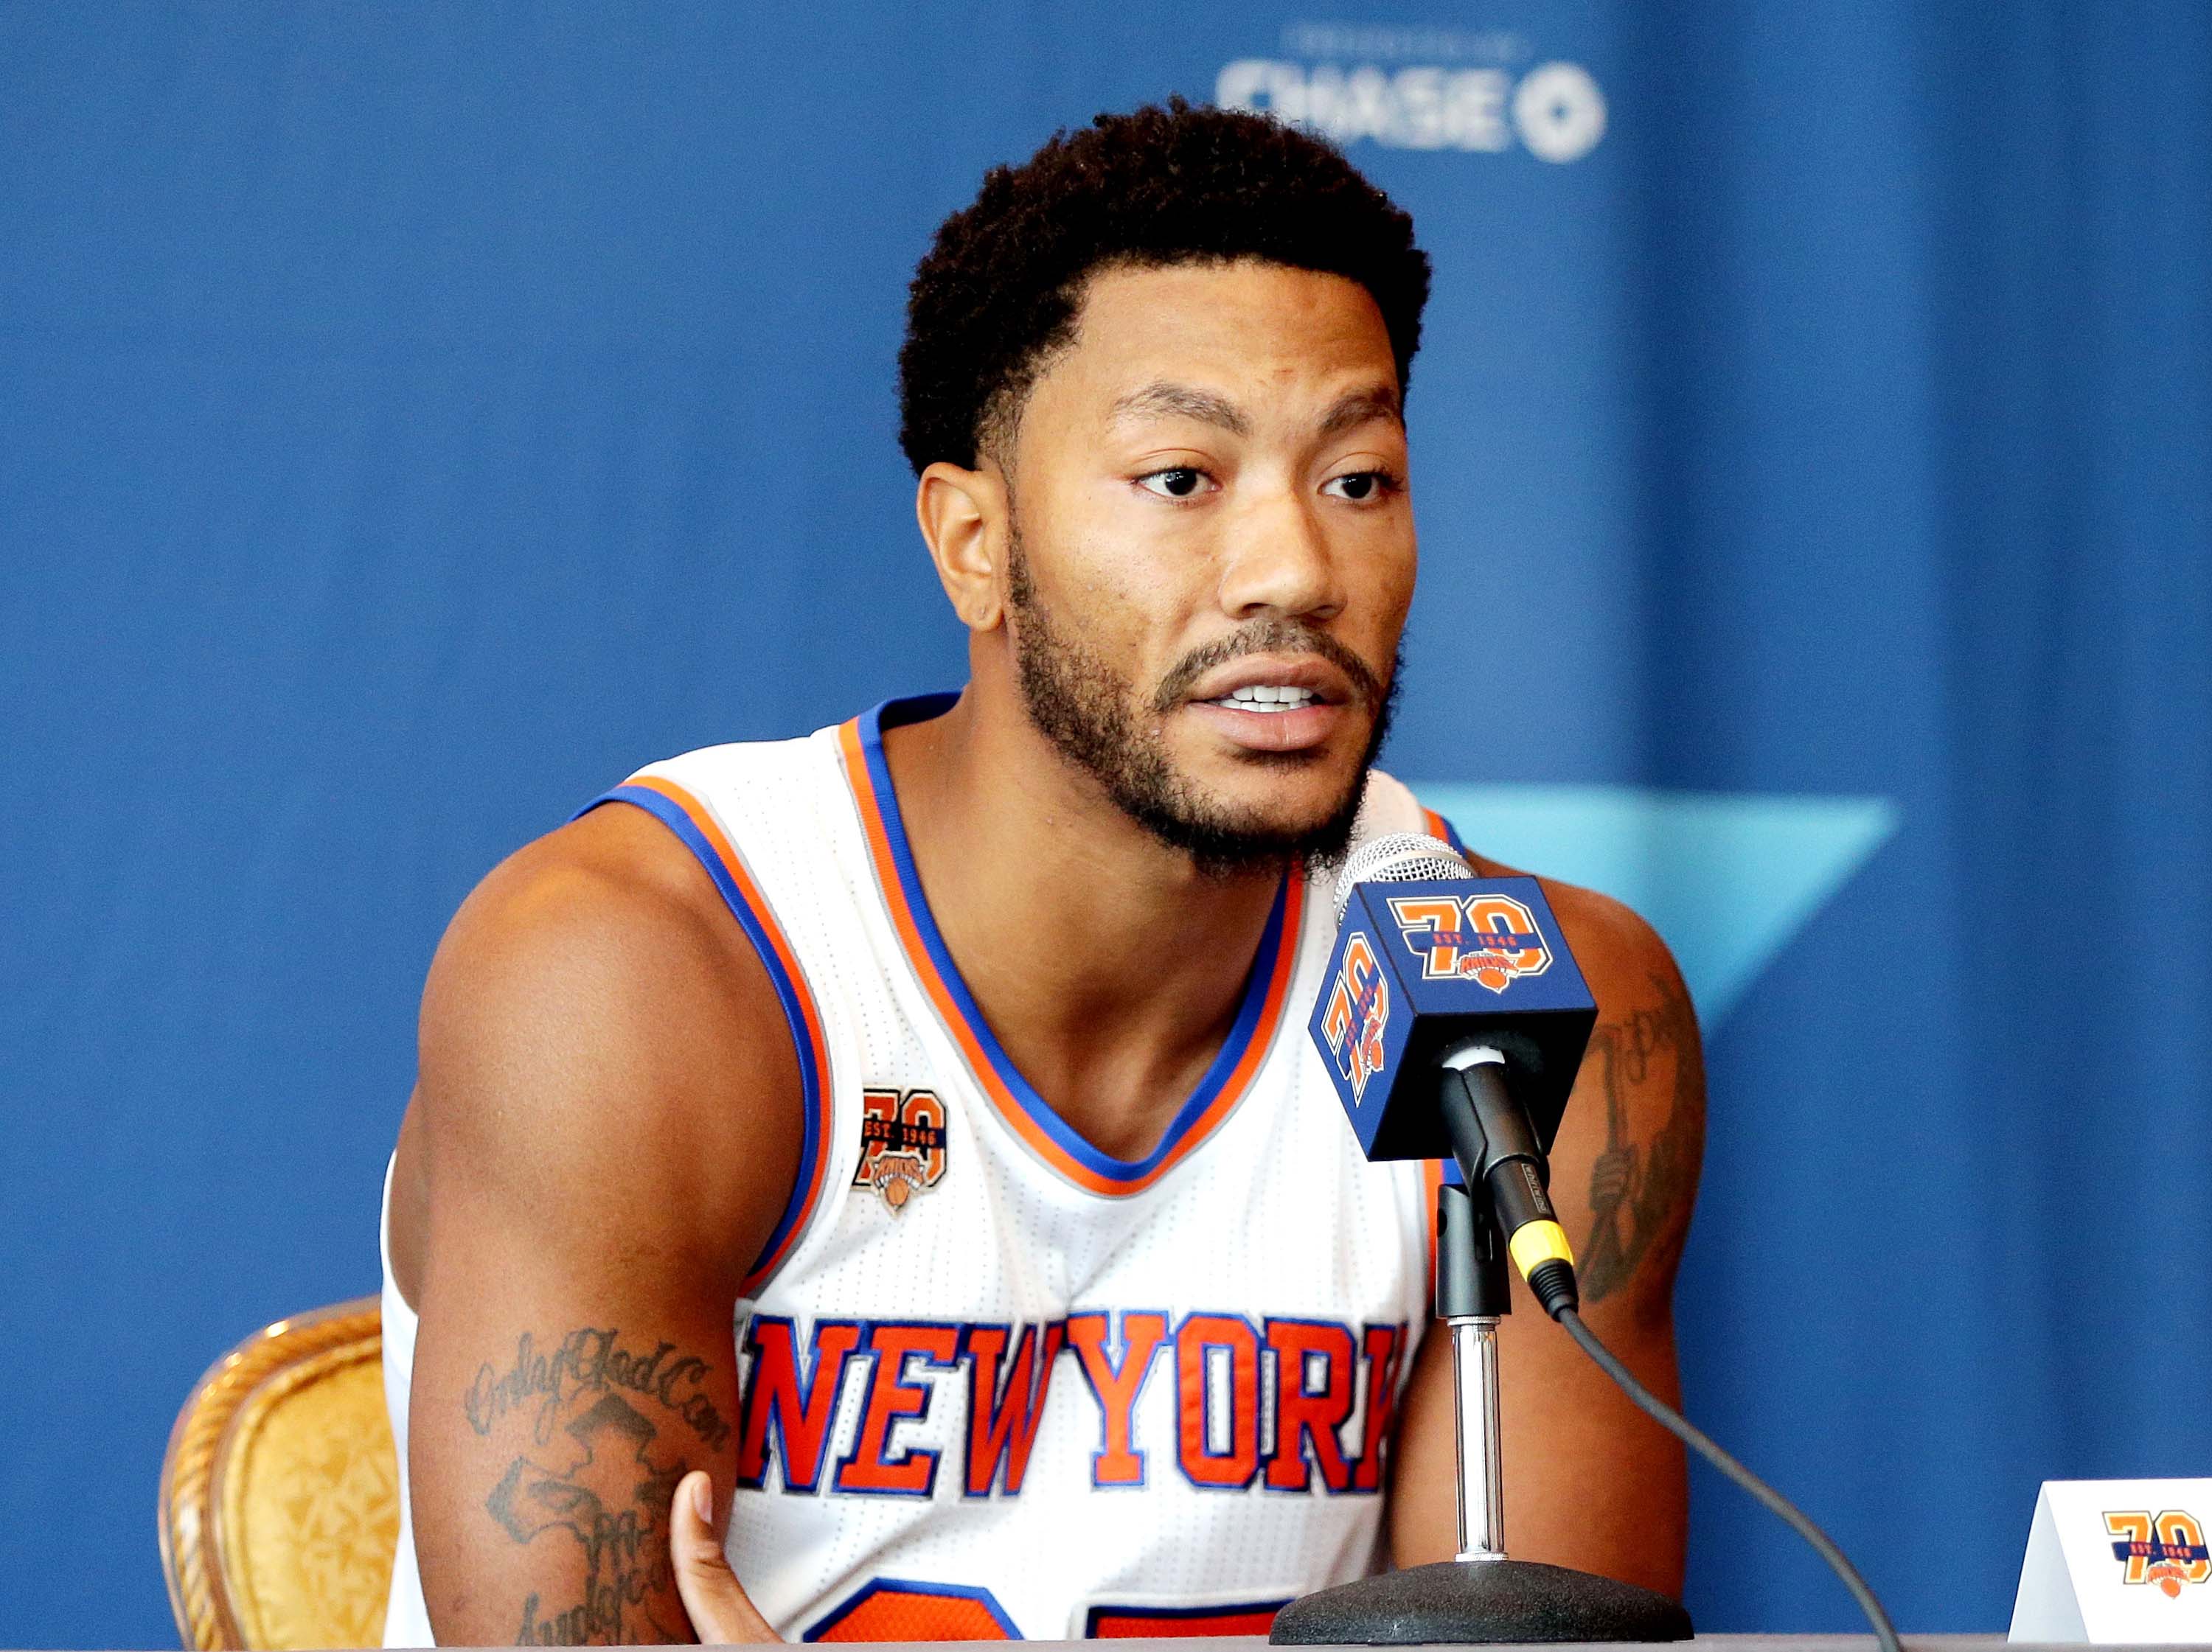 Derrick Rose Rape Case: Friend Of Accuser Claims She Lied For Money 